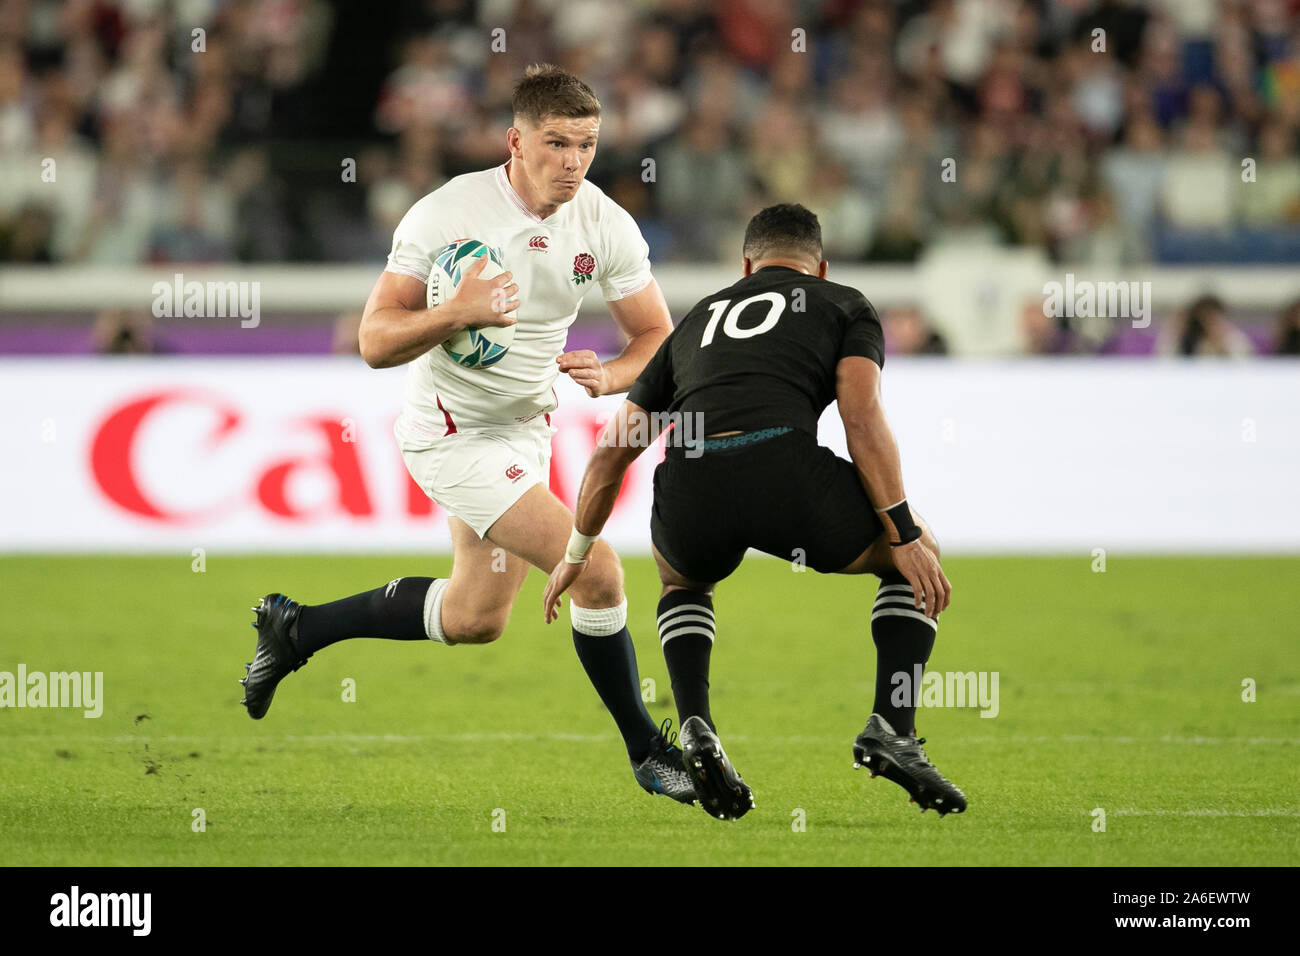 Yokohama, Japan. 26th Oct, 2019. Owen Farrell of England runs with the ball during the Rugby World Cup semi-final match between England and New Zealand in Kanagawa Prefecture, Japan, on October 26, 2019. Credit: European Sports Photographic Agency/Alamy Live News Stock Photo